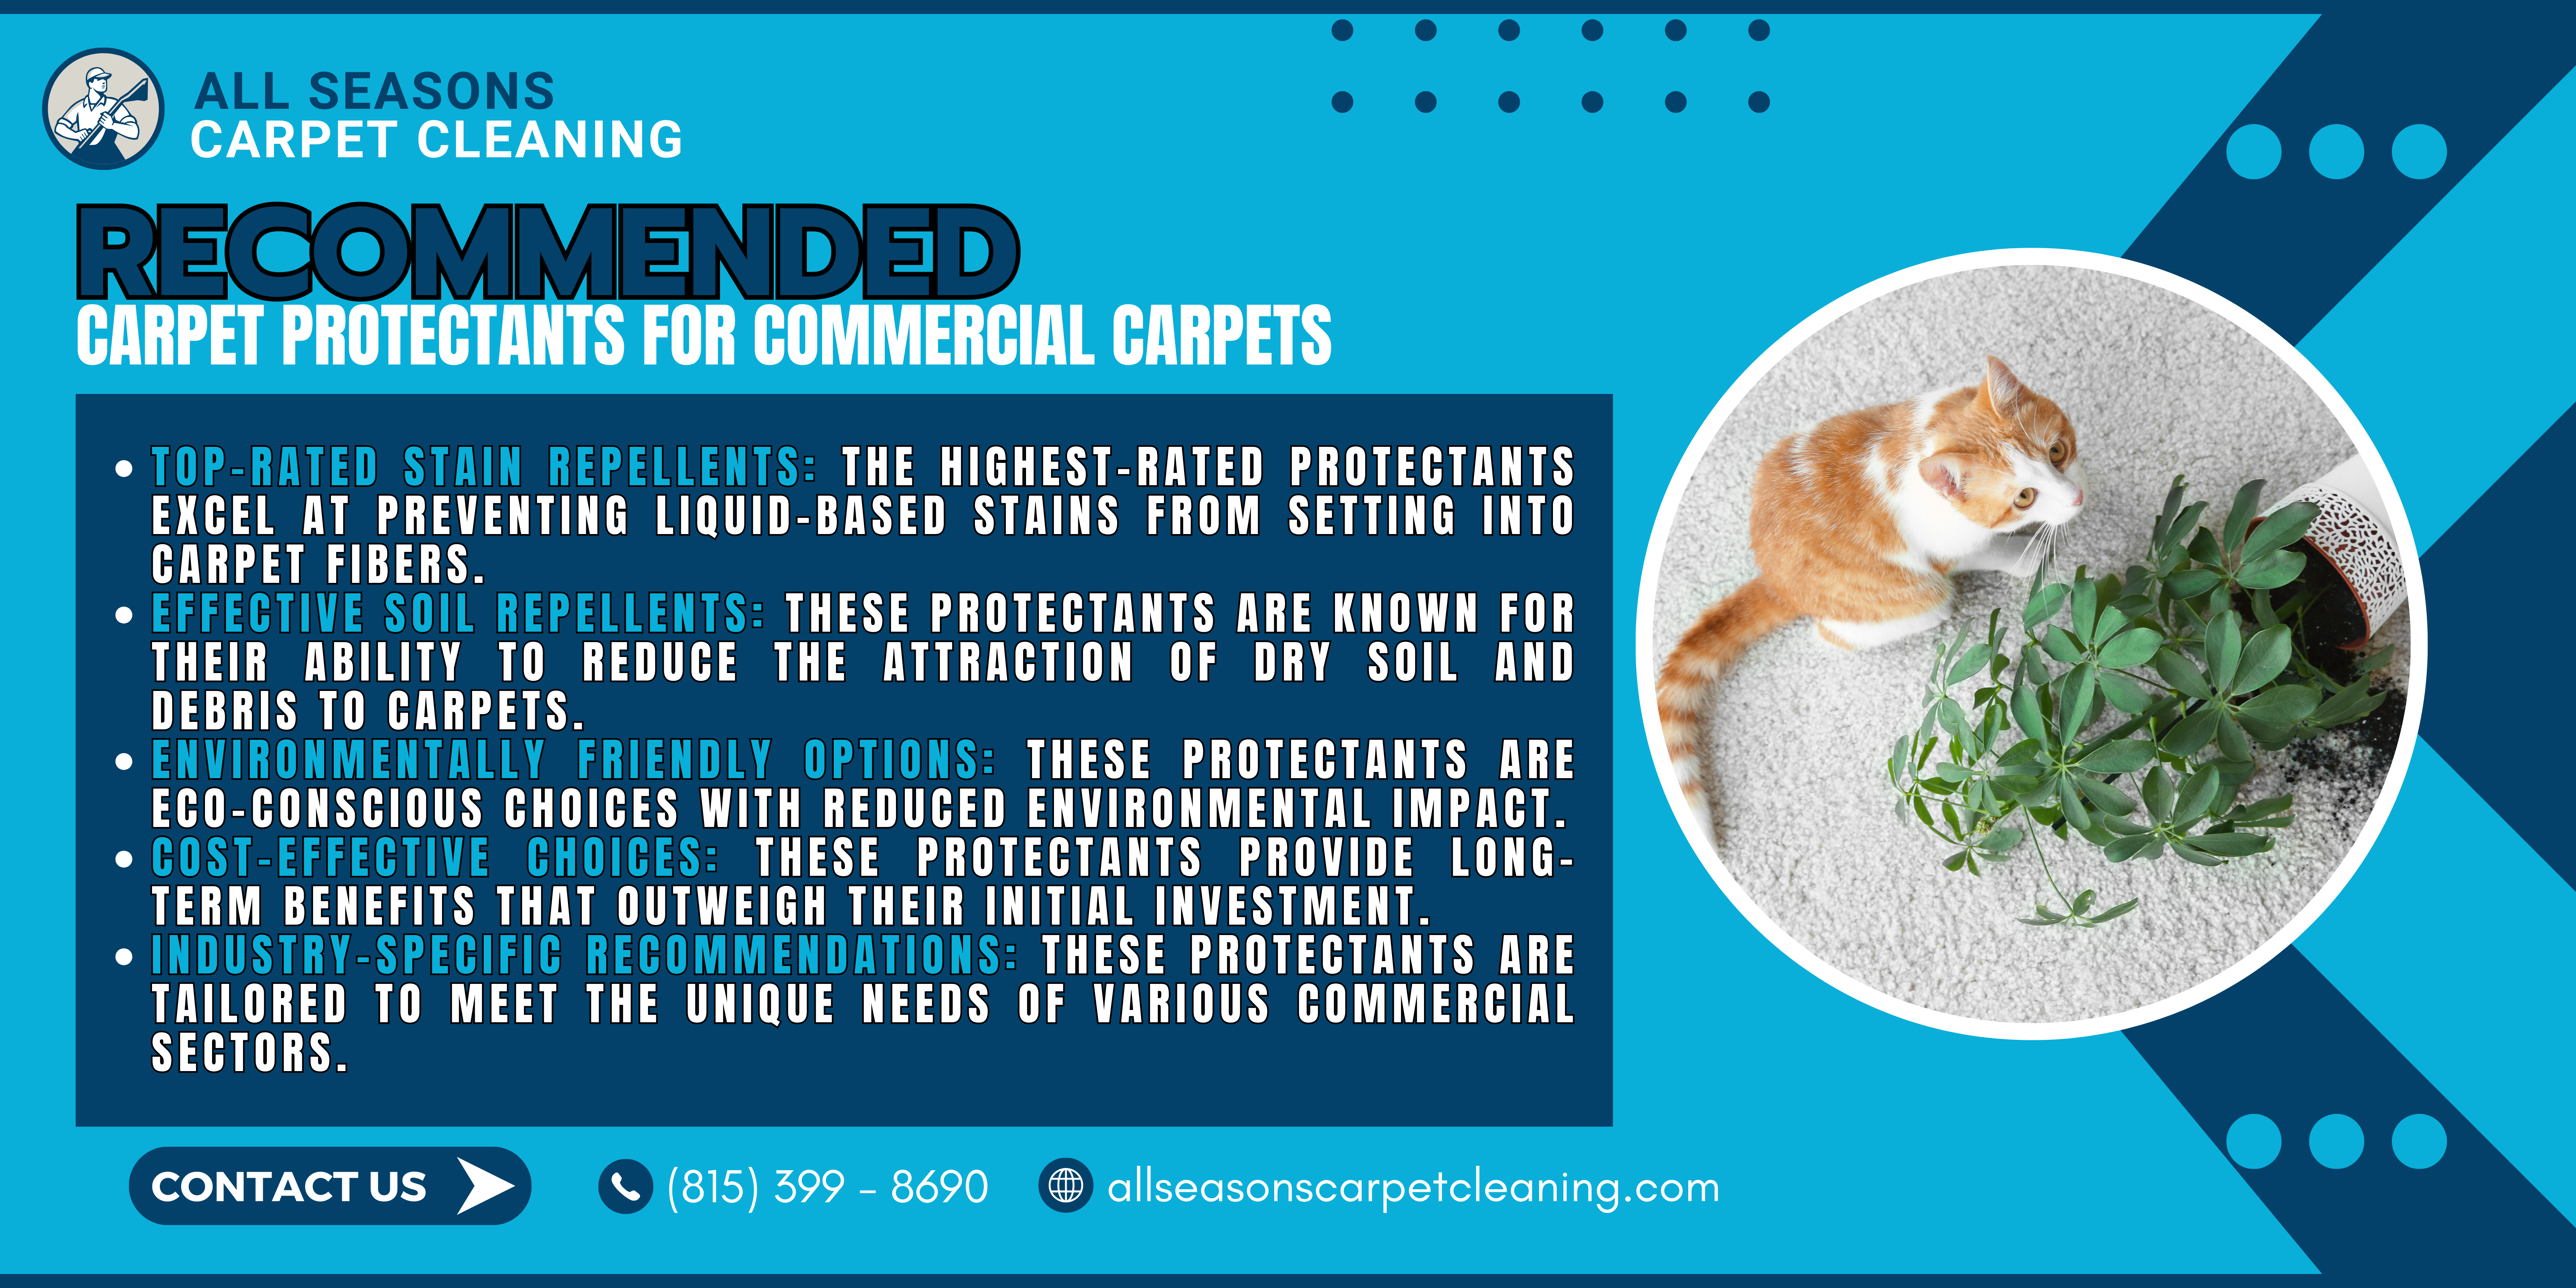 role of carpet protectants